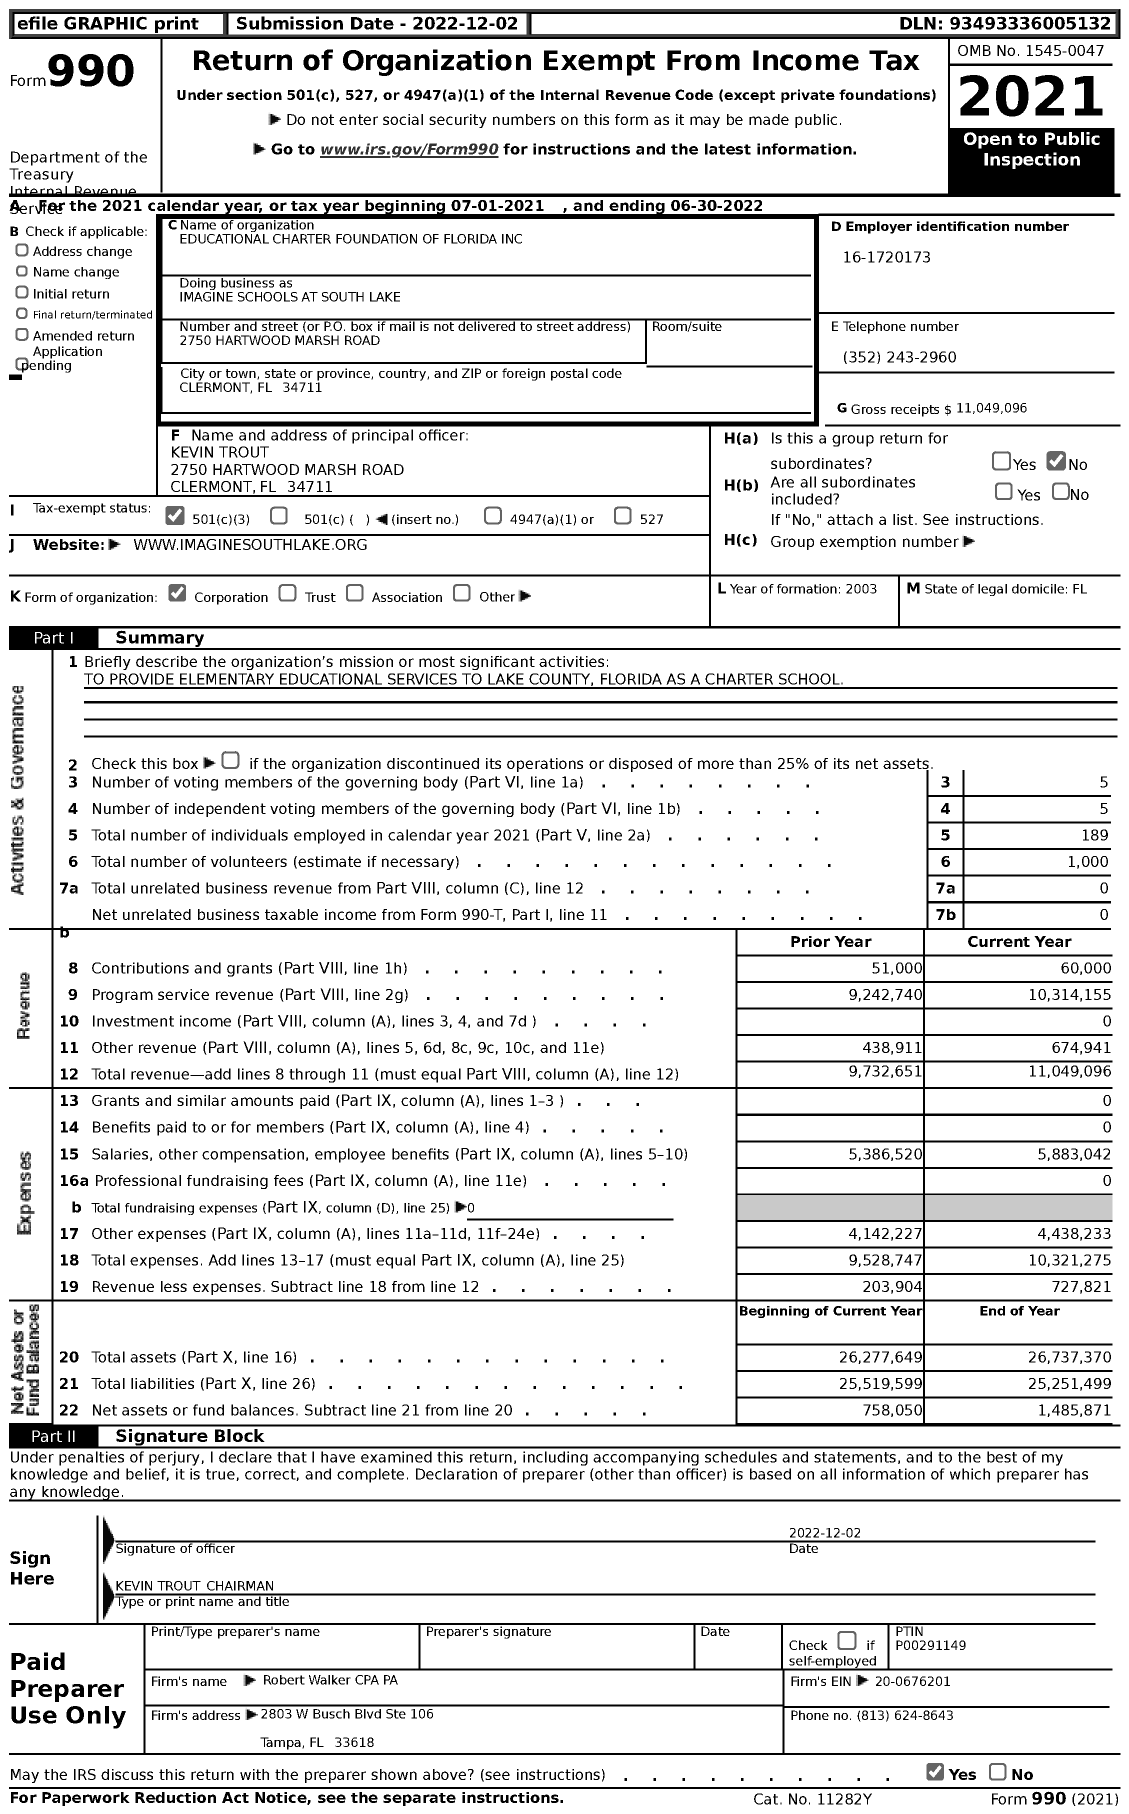 Image of first page of 2021 Form 990 for Imagine Schools at South Lake